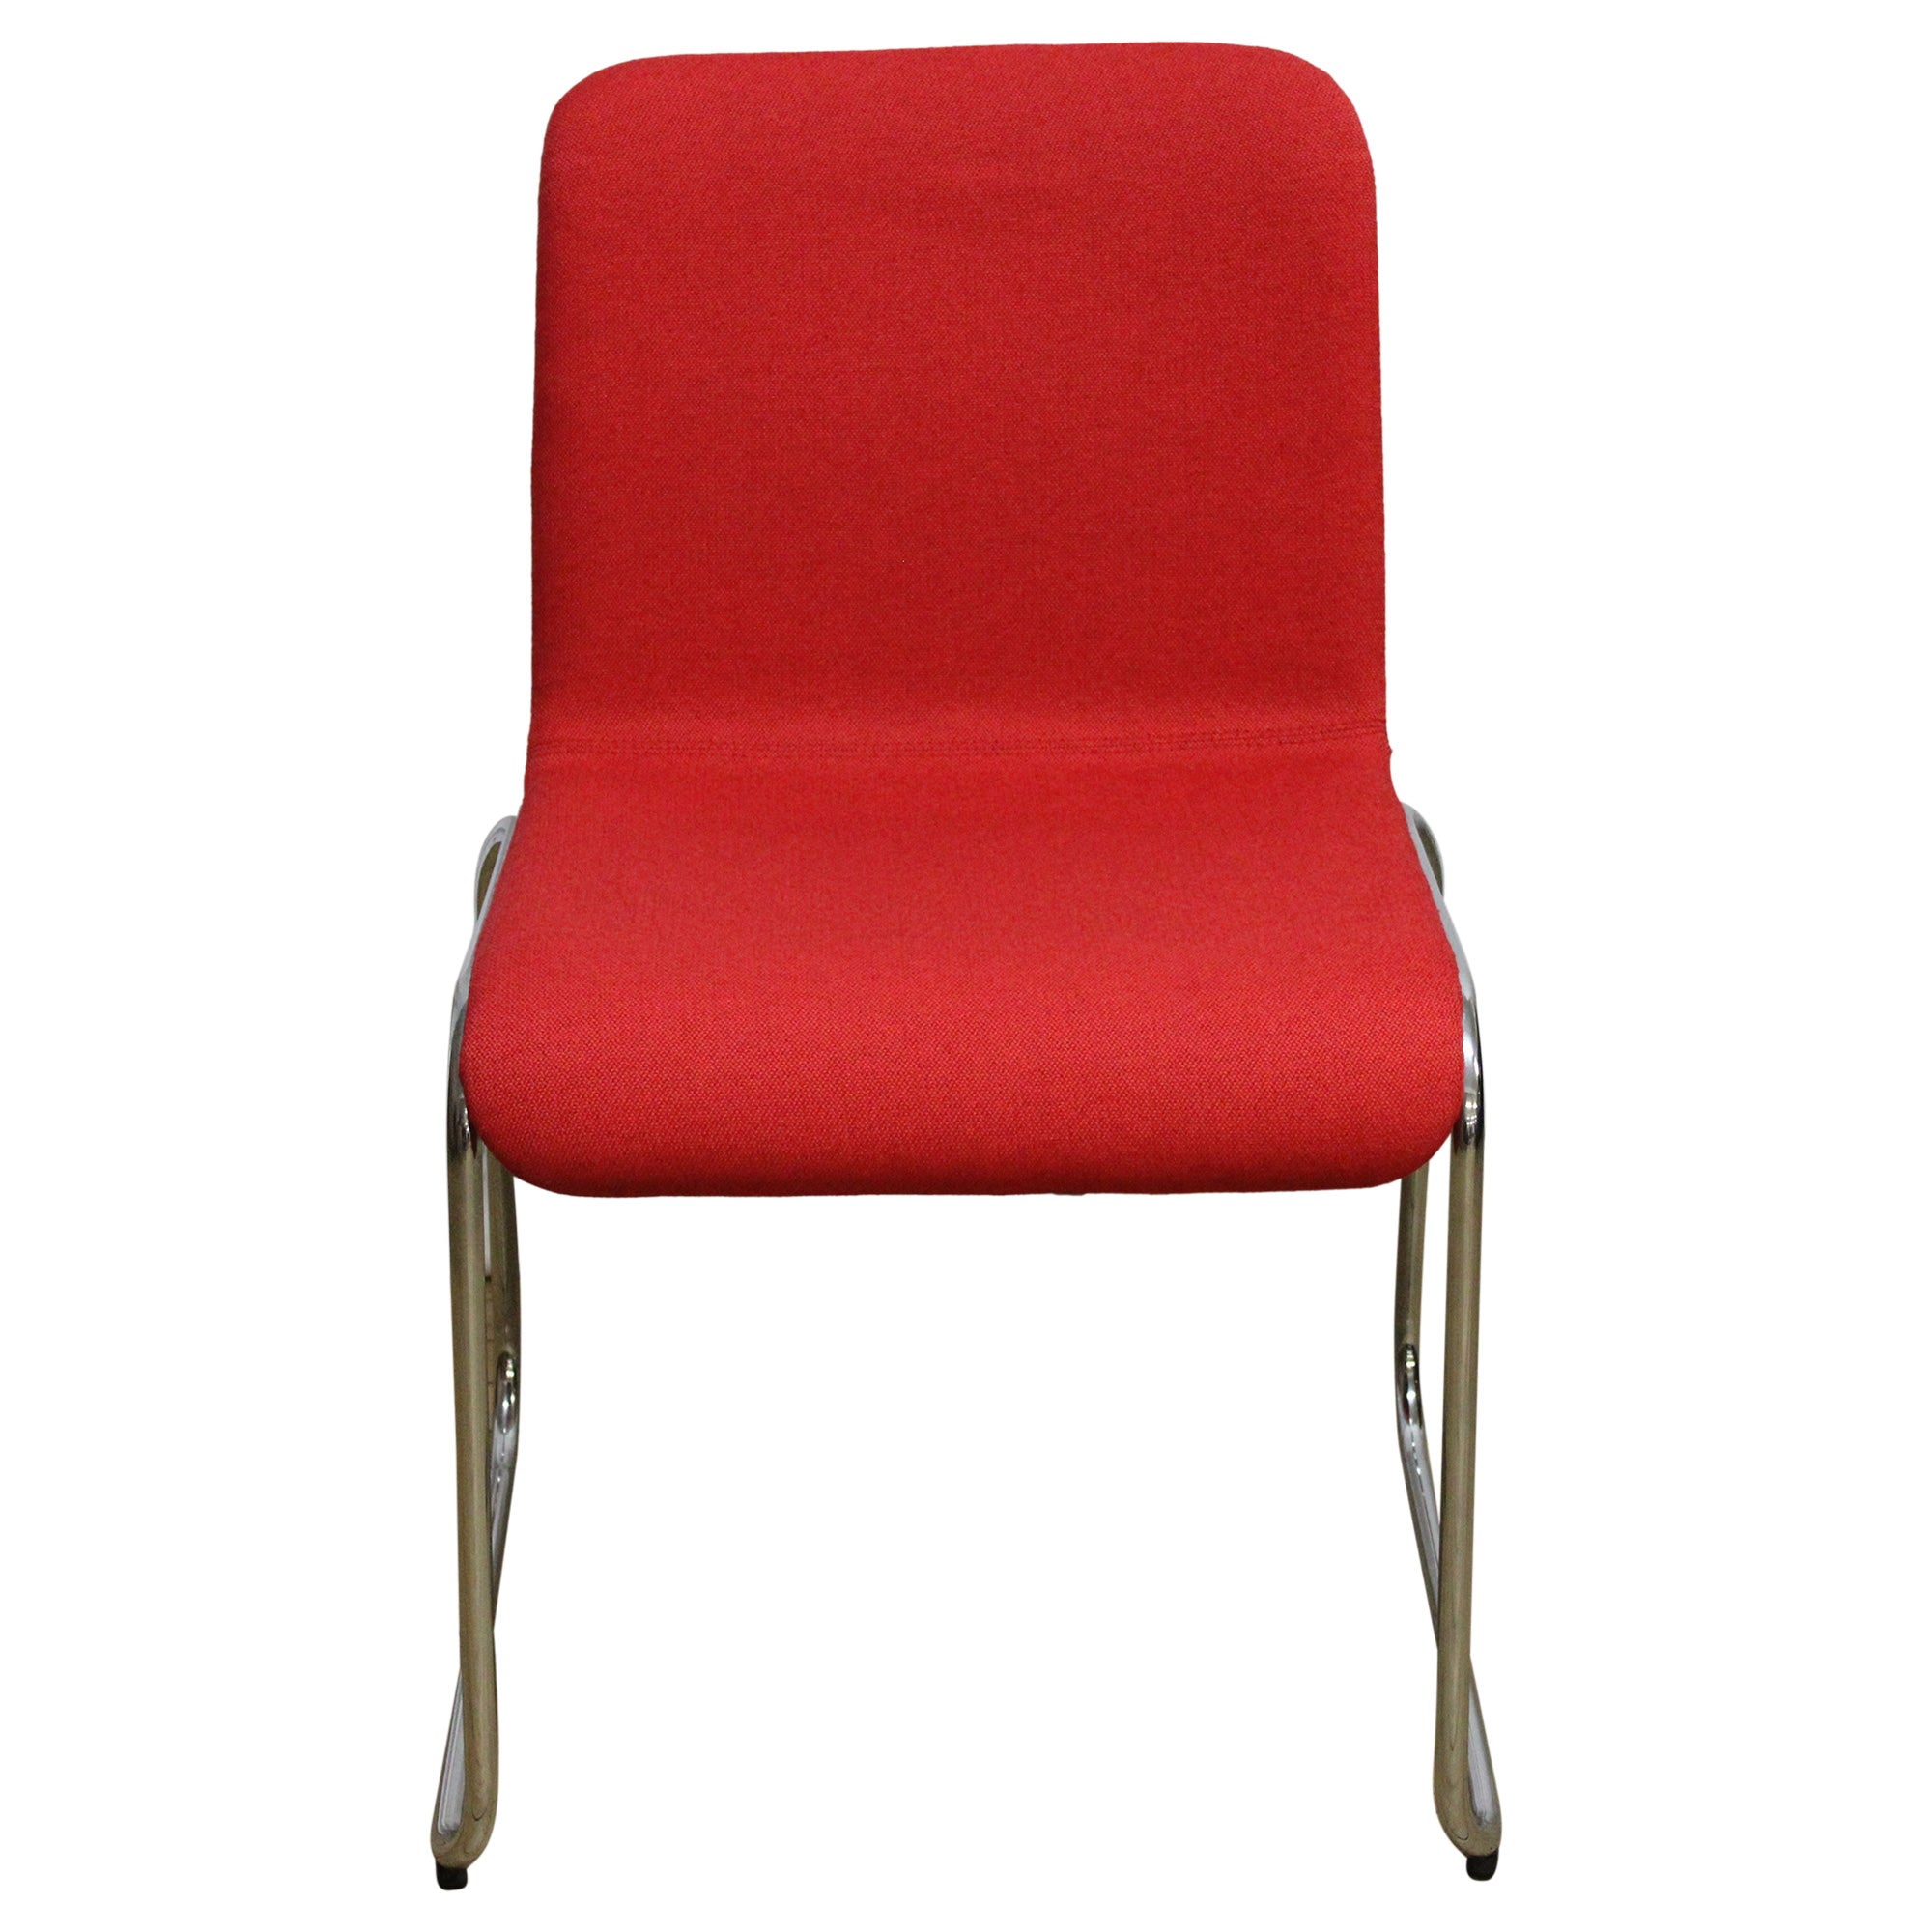 Stylex Sled Base Stack Chair, Red - Preowned